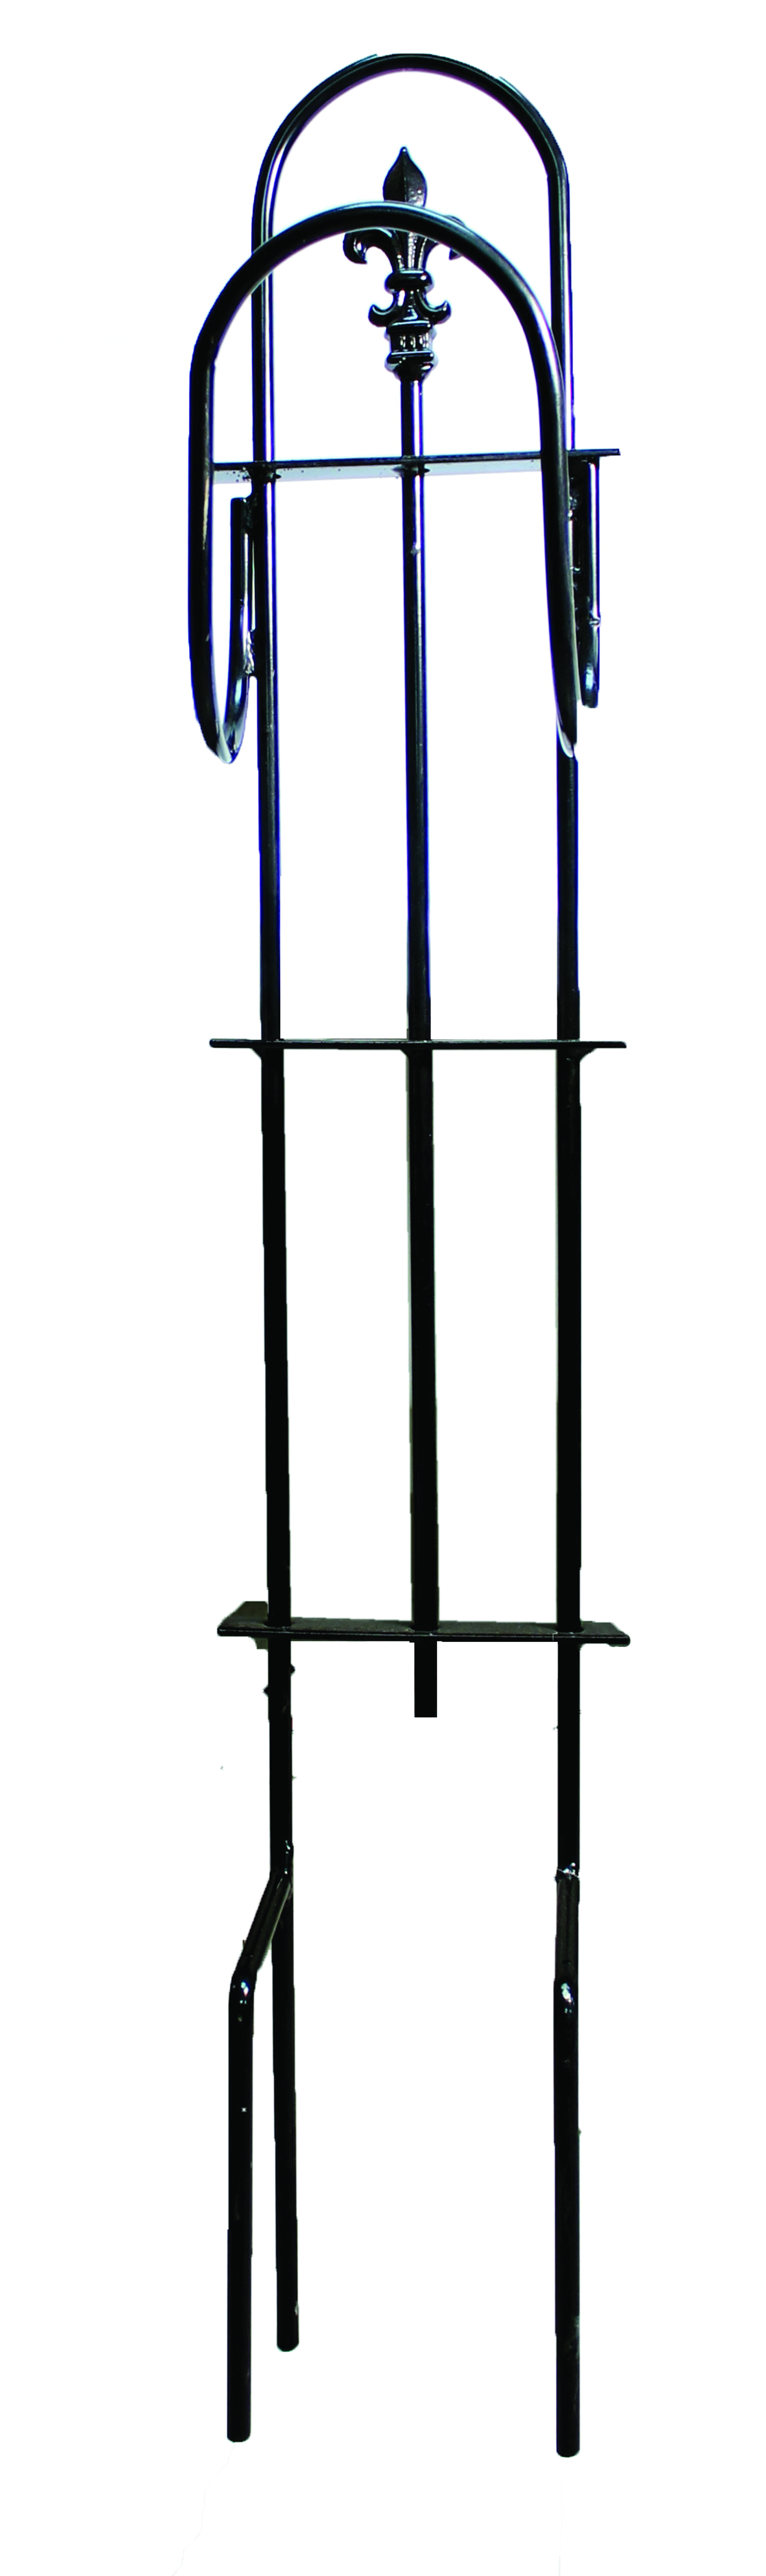 IN GROUND HOSE HOLDER WROUGHT IRON